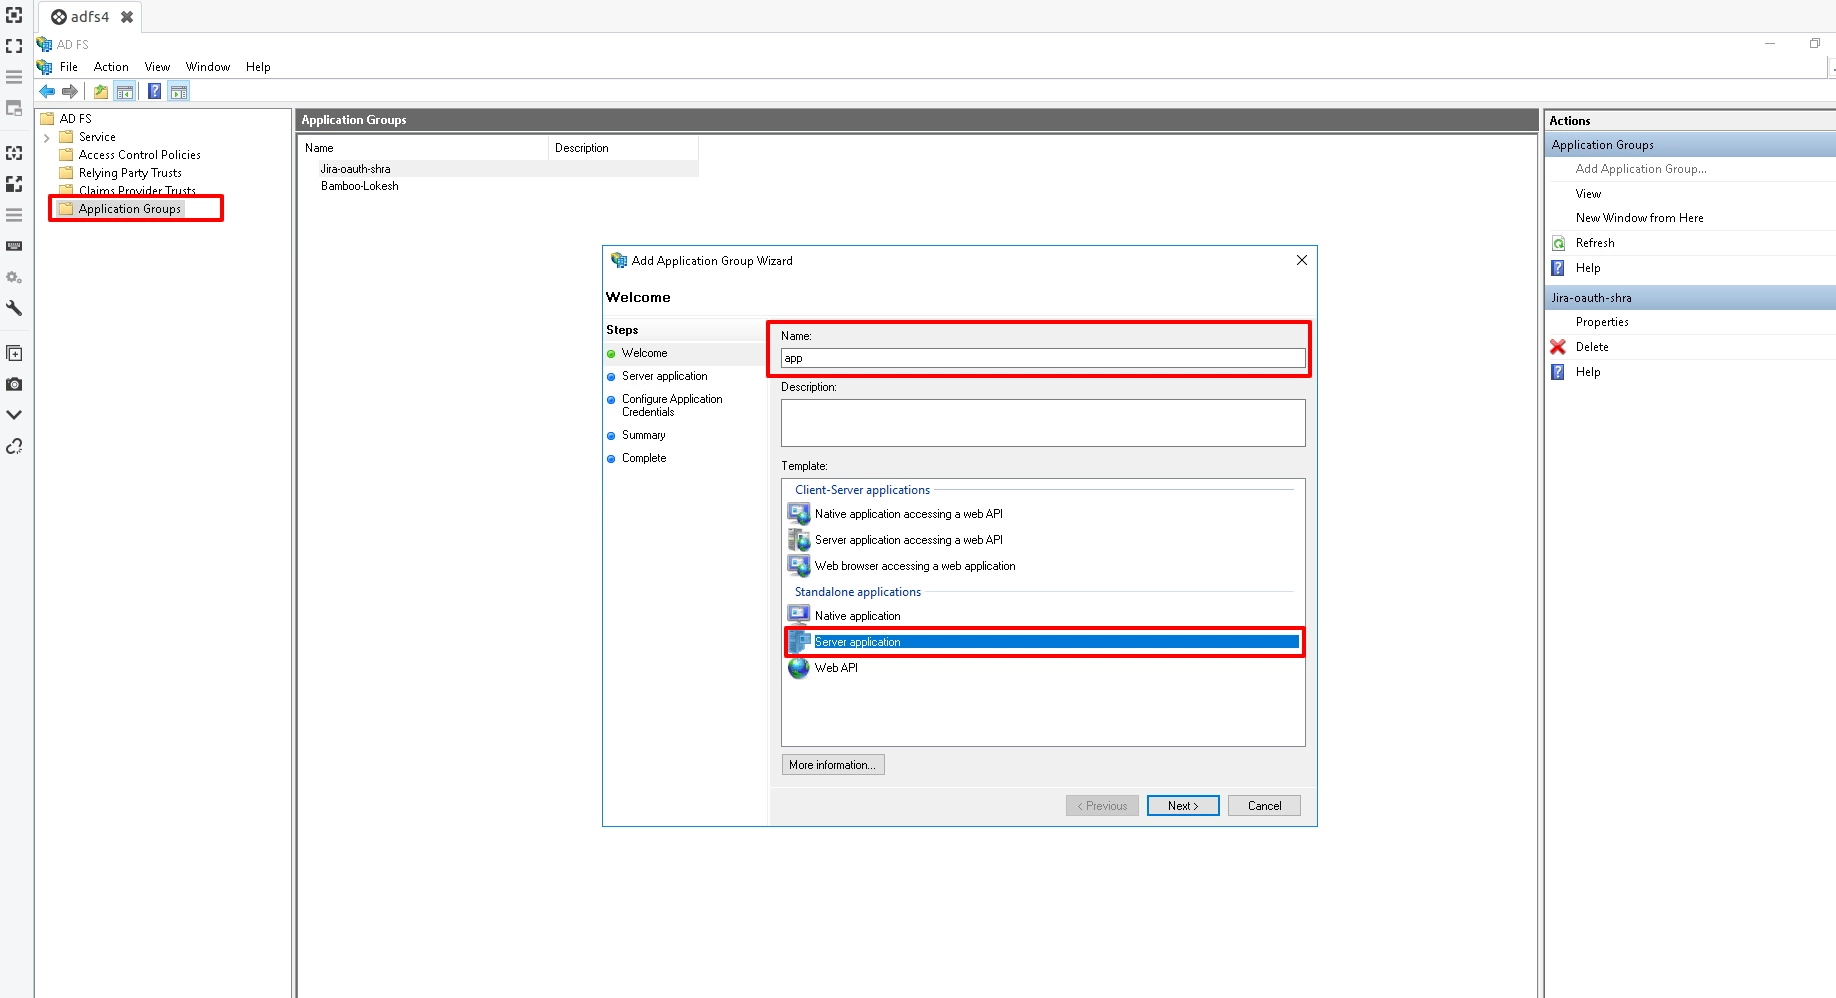 ADFS SSO OAuth / OpenID Single Sign On (SSO) using ADFS, Application Group